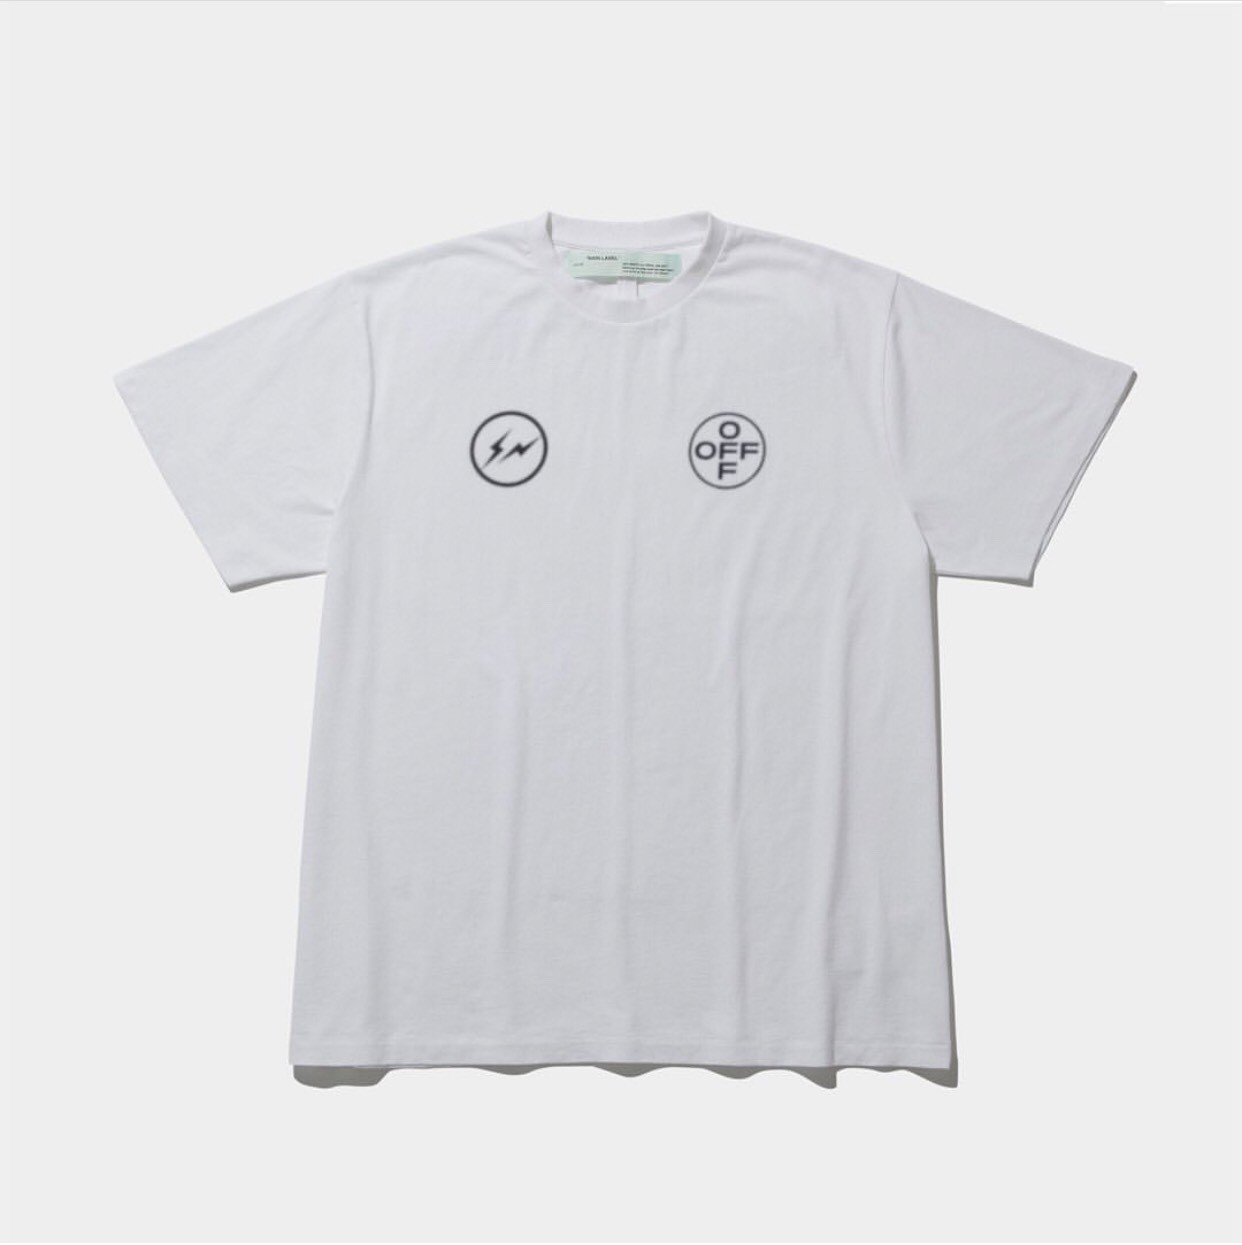 ▲Off-White X Fragment Design「CEREAL」T-Shirt系列。（圖／翻攝自IG@theconveni）